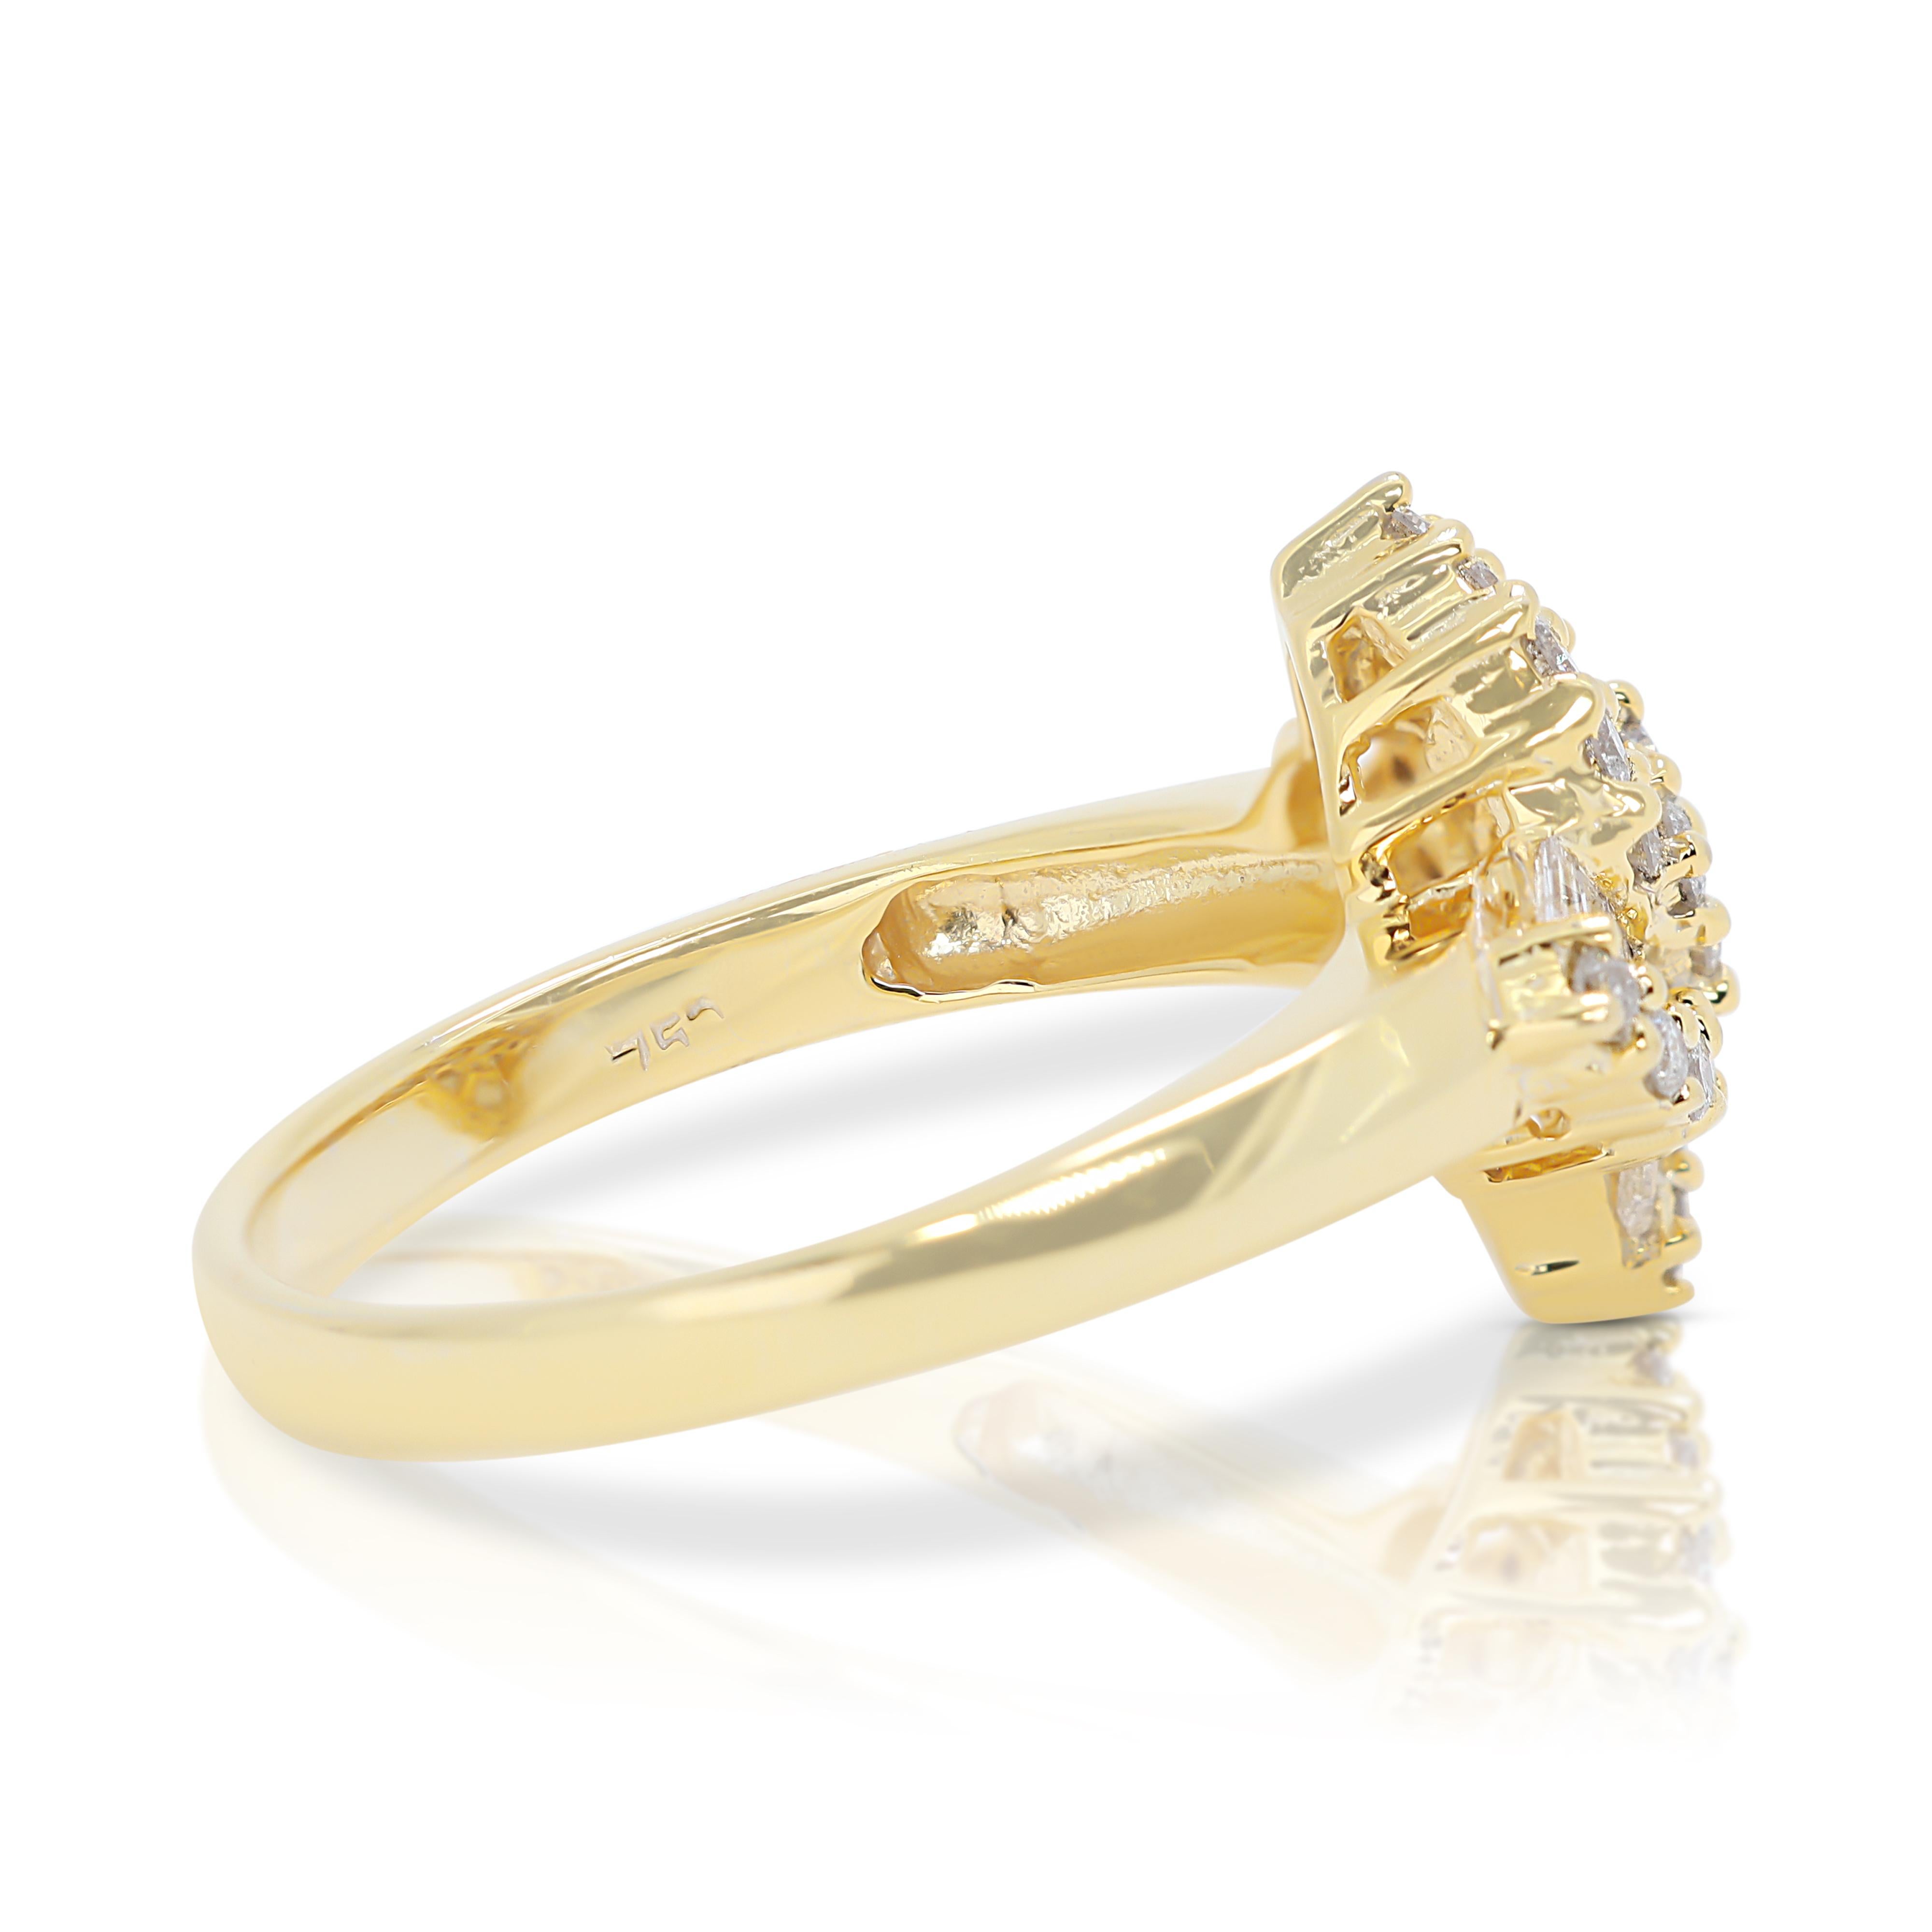 Brilliant 0.42ct Diamonds Cluster Ring in 18K Yellow Gold For Sale 2